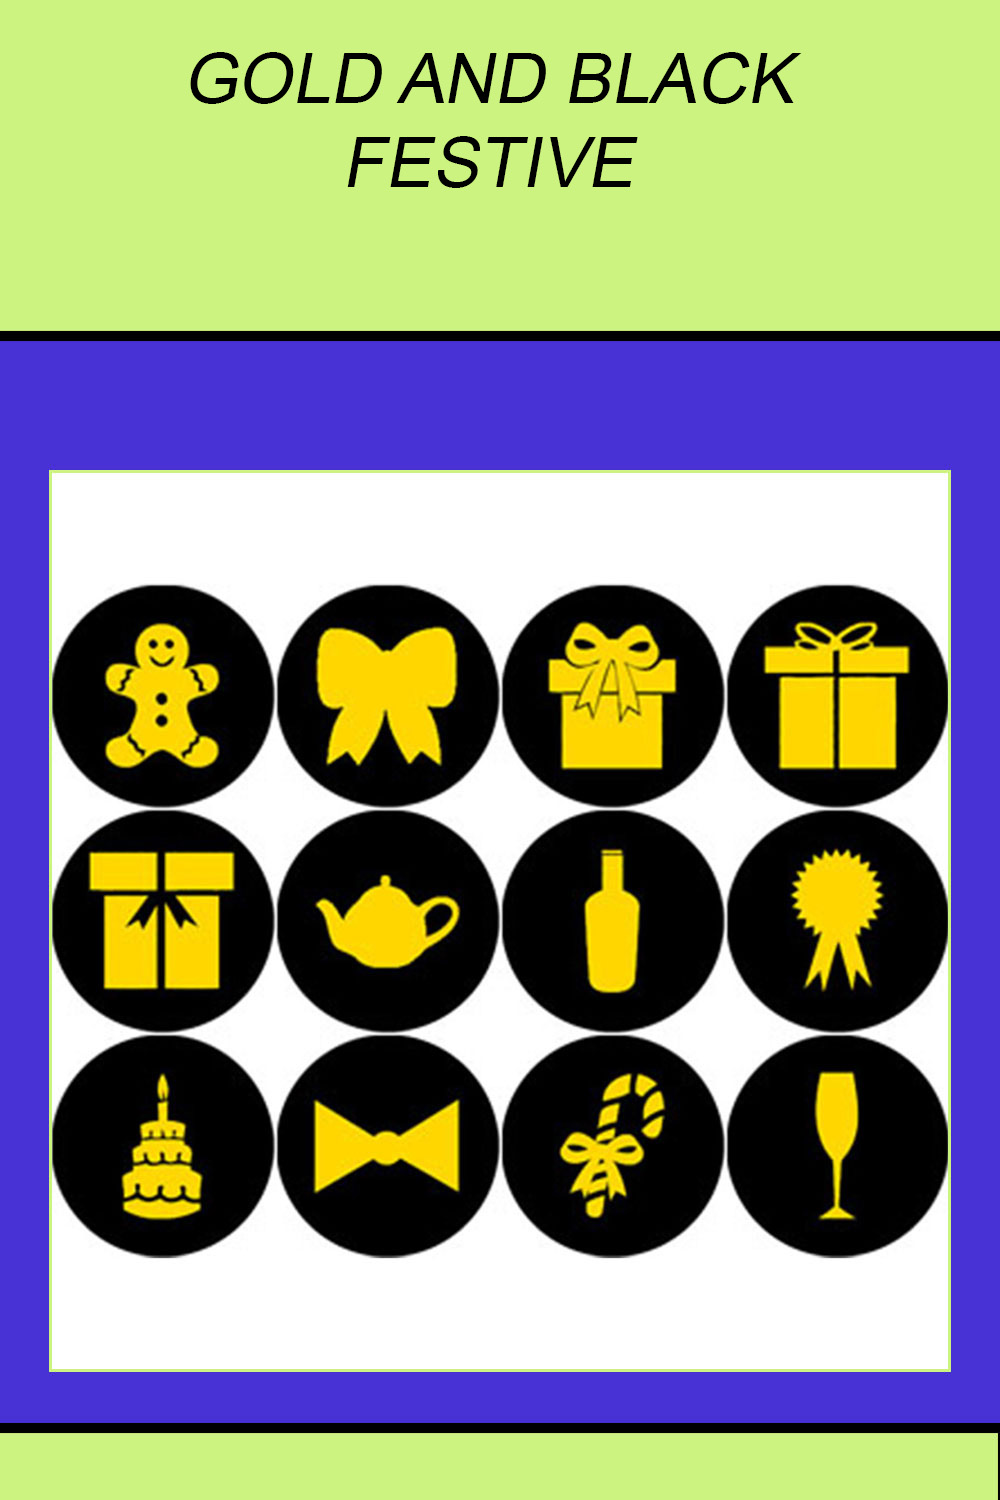 GOLD AND BLACK FESTIVE ROUND ICONS pinterest preview image.